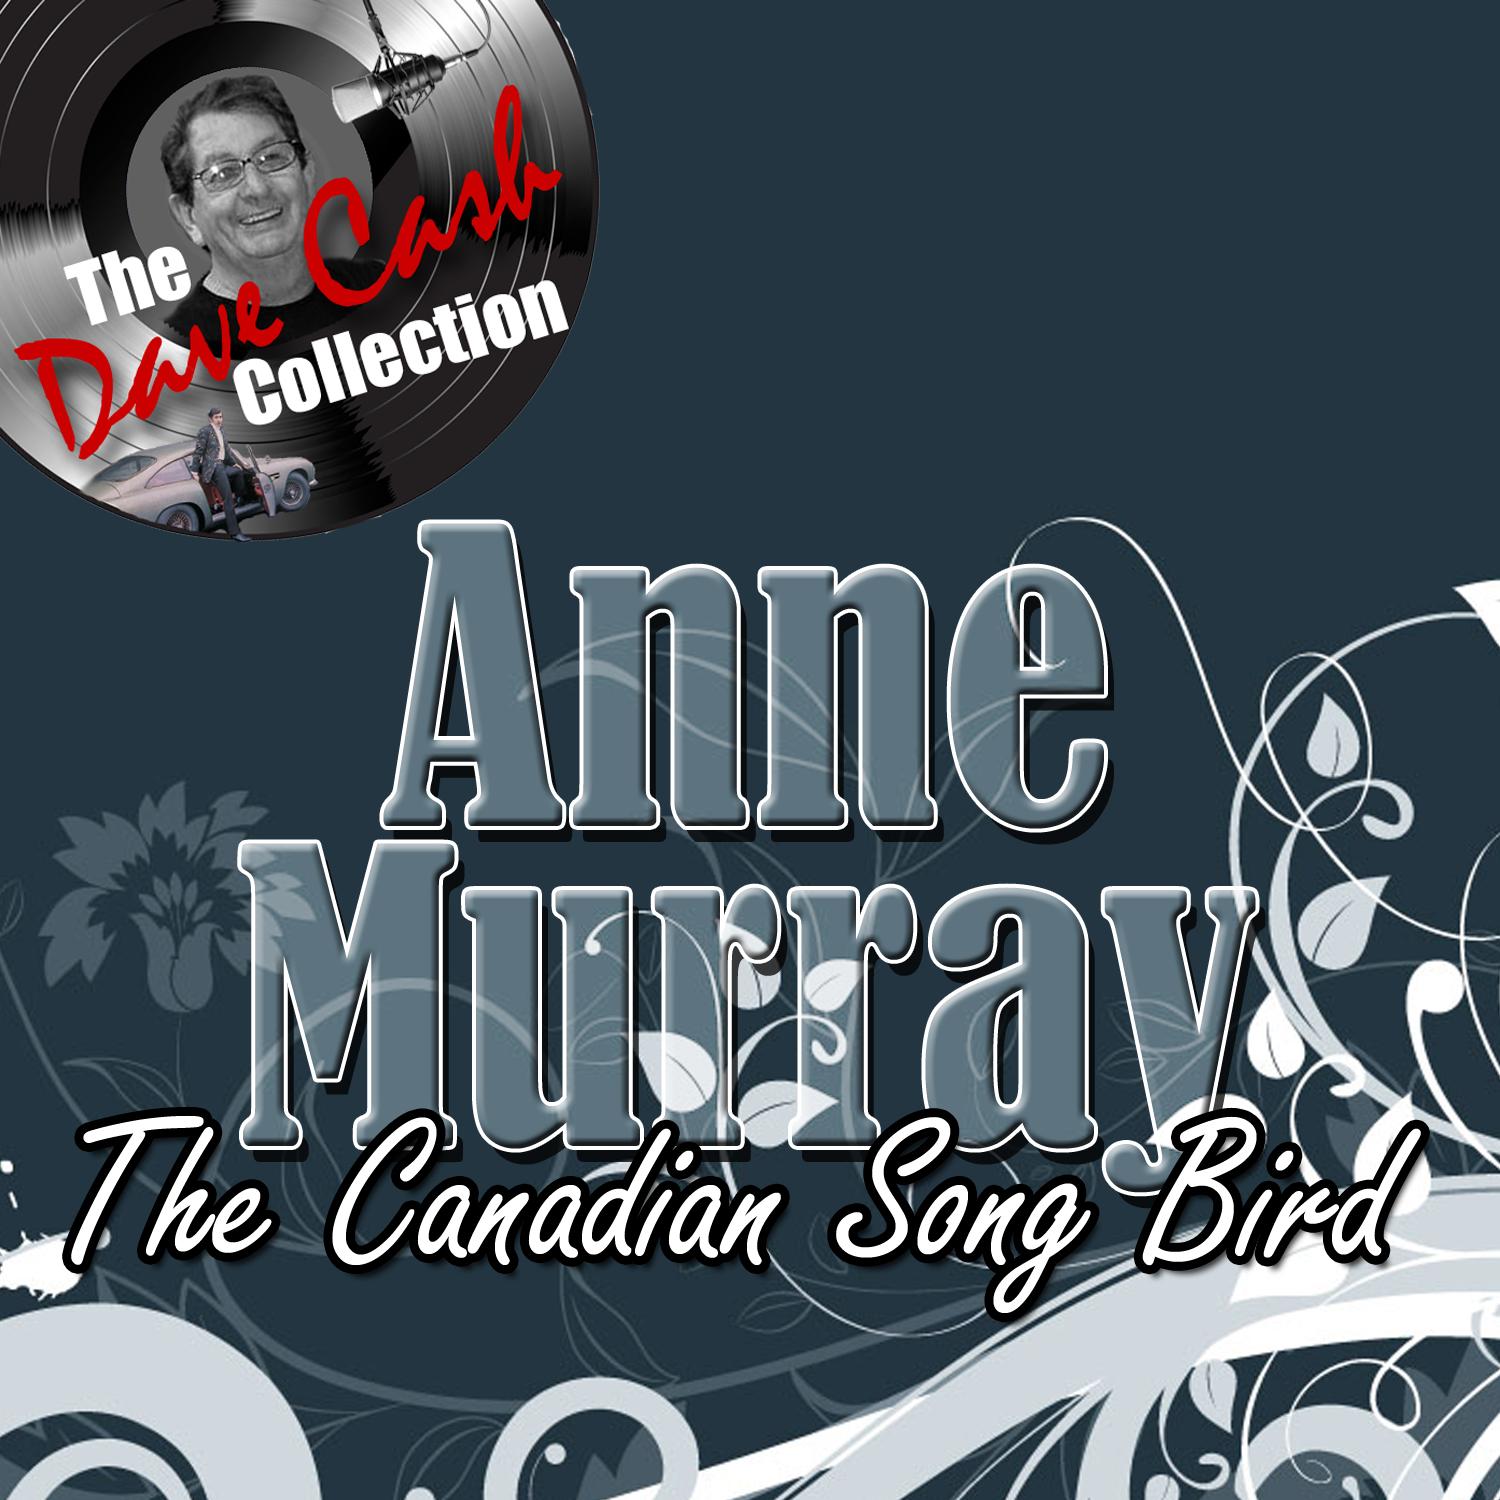 The Canadian Song Bird - [The Dave Cash Collection]